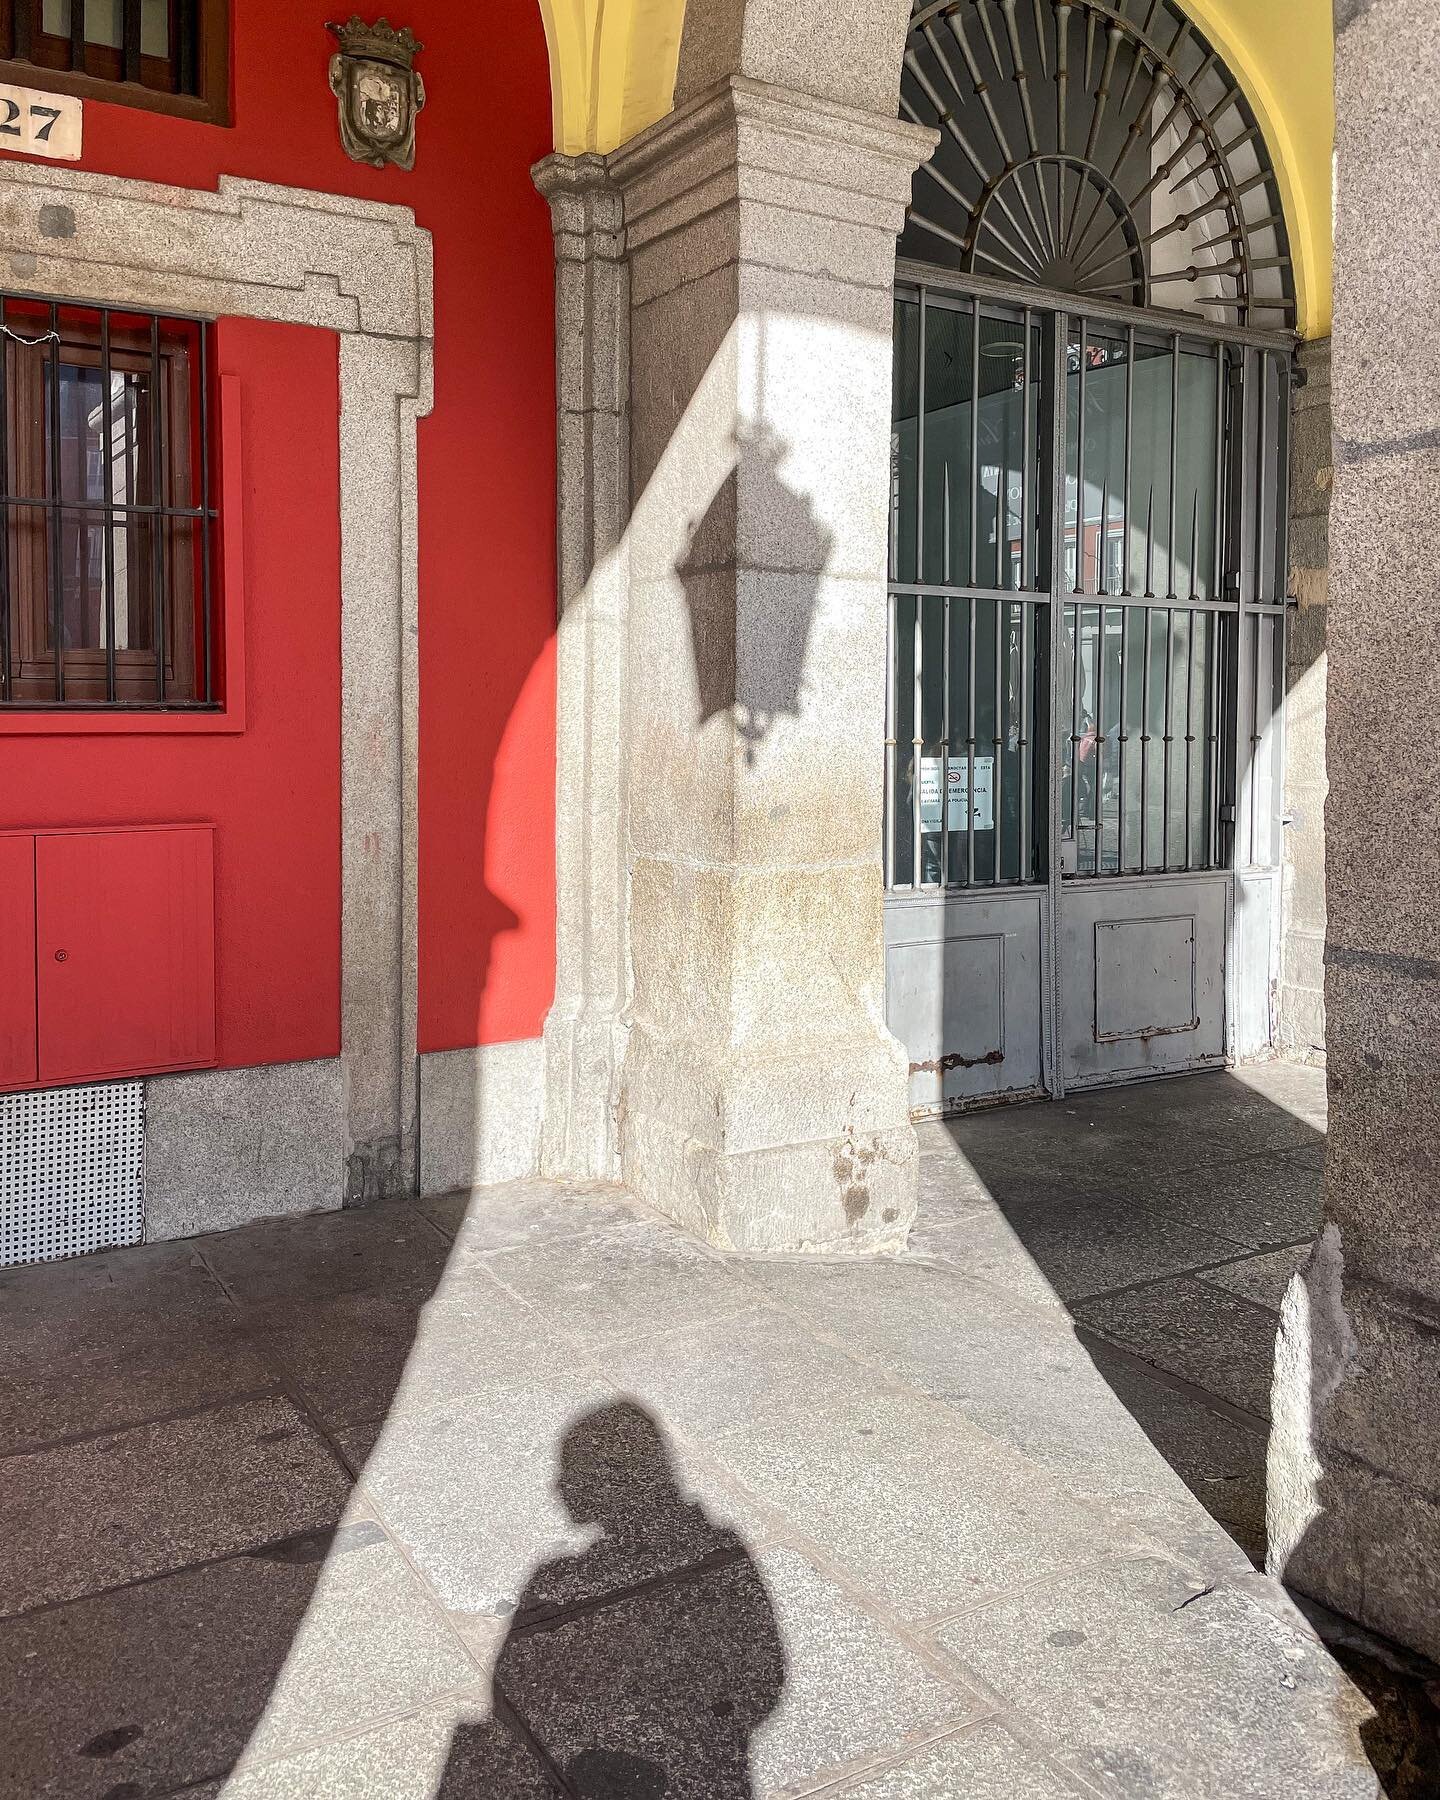 Scenes from Madrid where tortilla espa&ntilde;ola and glasses of vermouth were enjoyed between aimless strolls and talks with kind strangers. We&rsquo;ll be back. #mytinyatlas